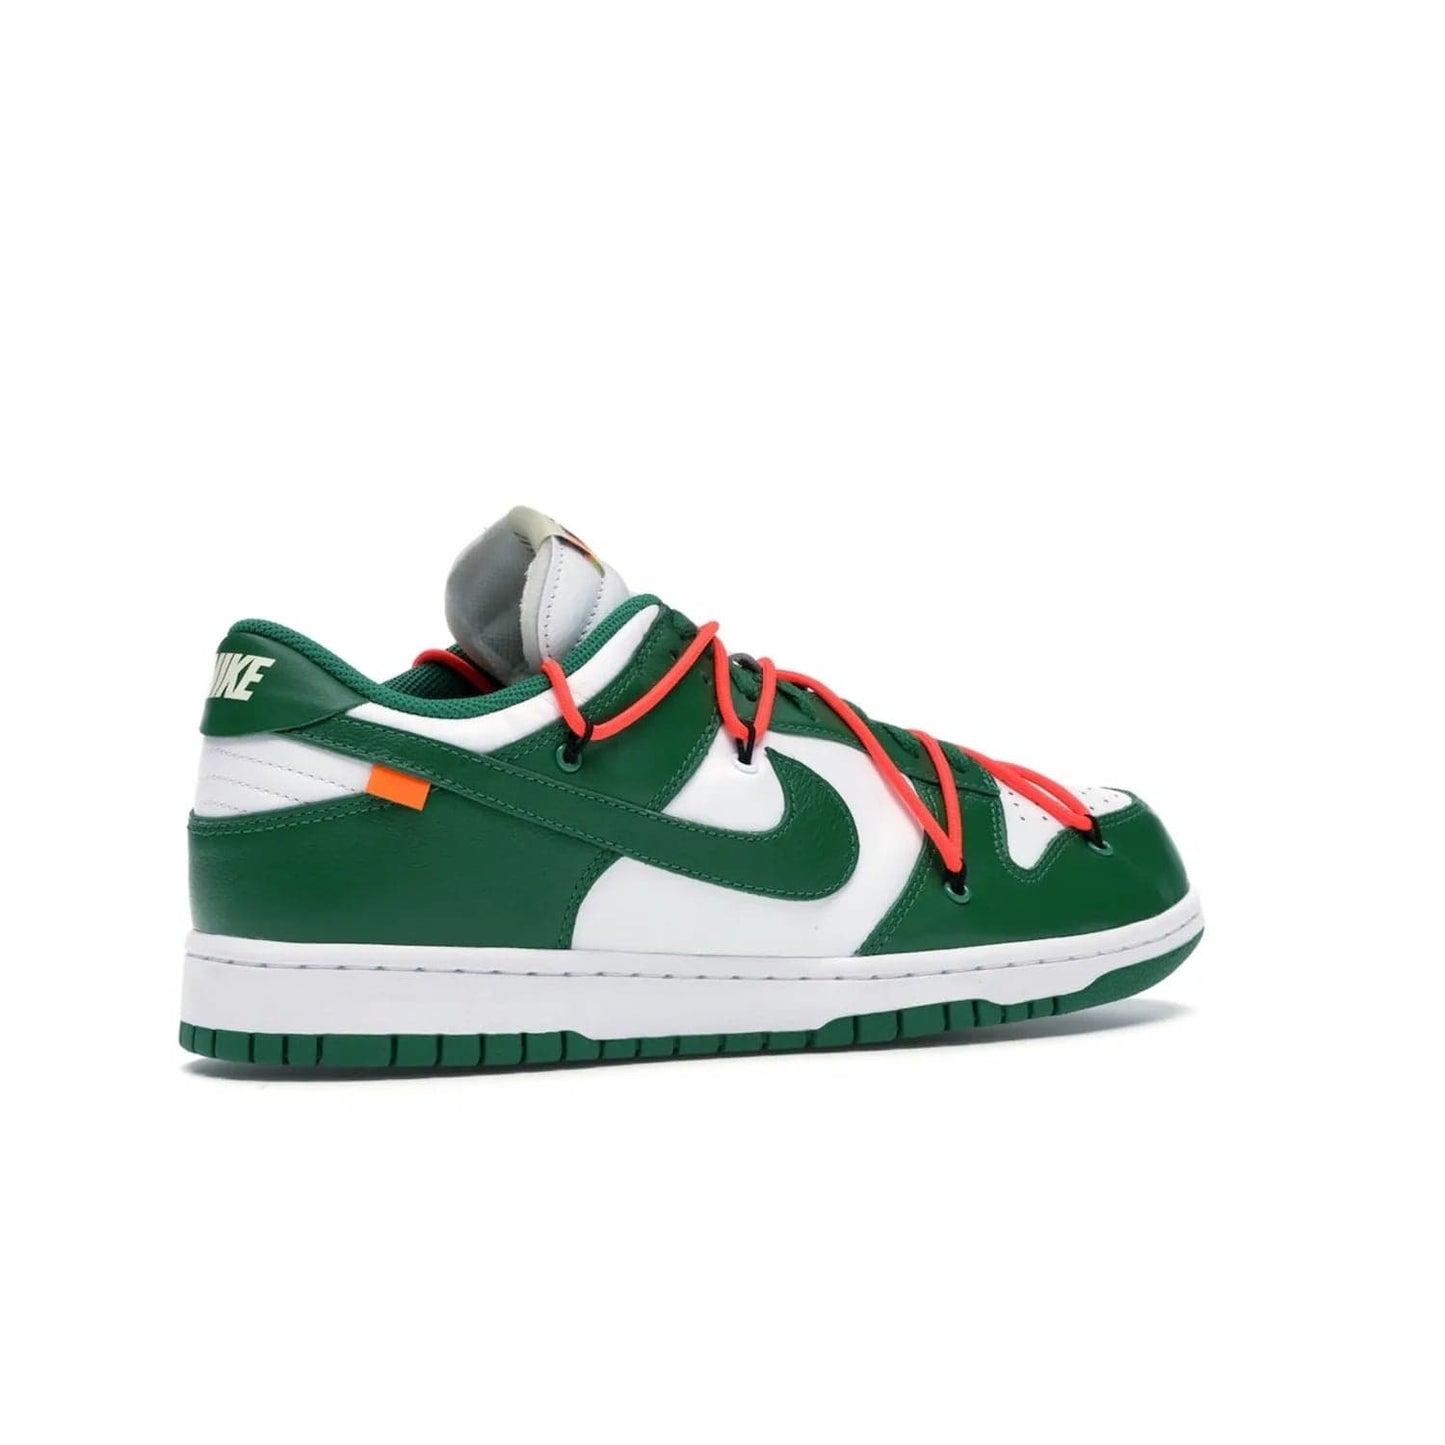 Nike Dunk Low Off-White Pine Green - Image 34 - Only at www.BallersClubKickz.com - The Nike Dunk Low Off-White Pine Green combines classic 1980s style with modern-day design. Featuring white leather uppers and pine green overlays, these classic kicks feature secondary lacing system, zip-ties and signature Off-White text. Releasing in December 2019, these shoes are a timeless classic for any wardrobe.